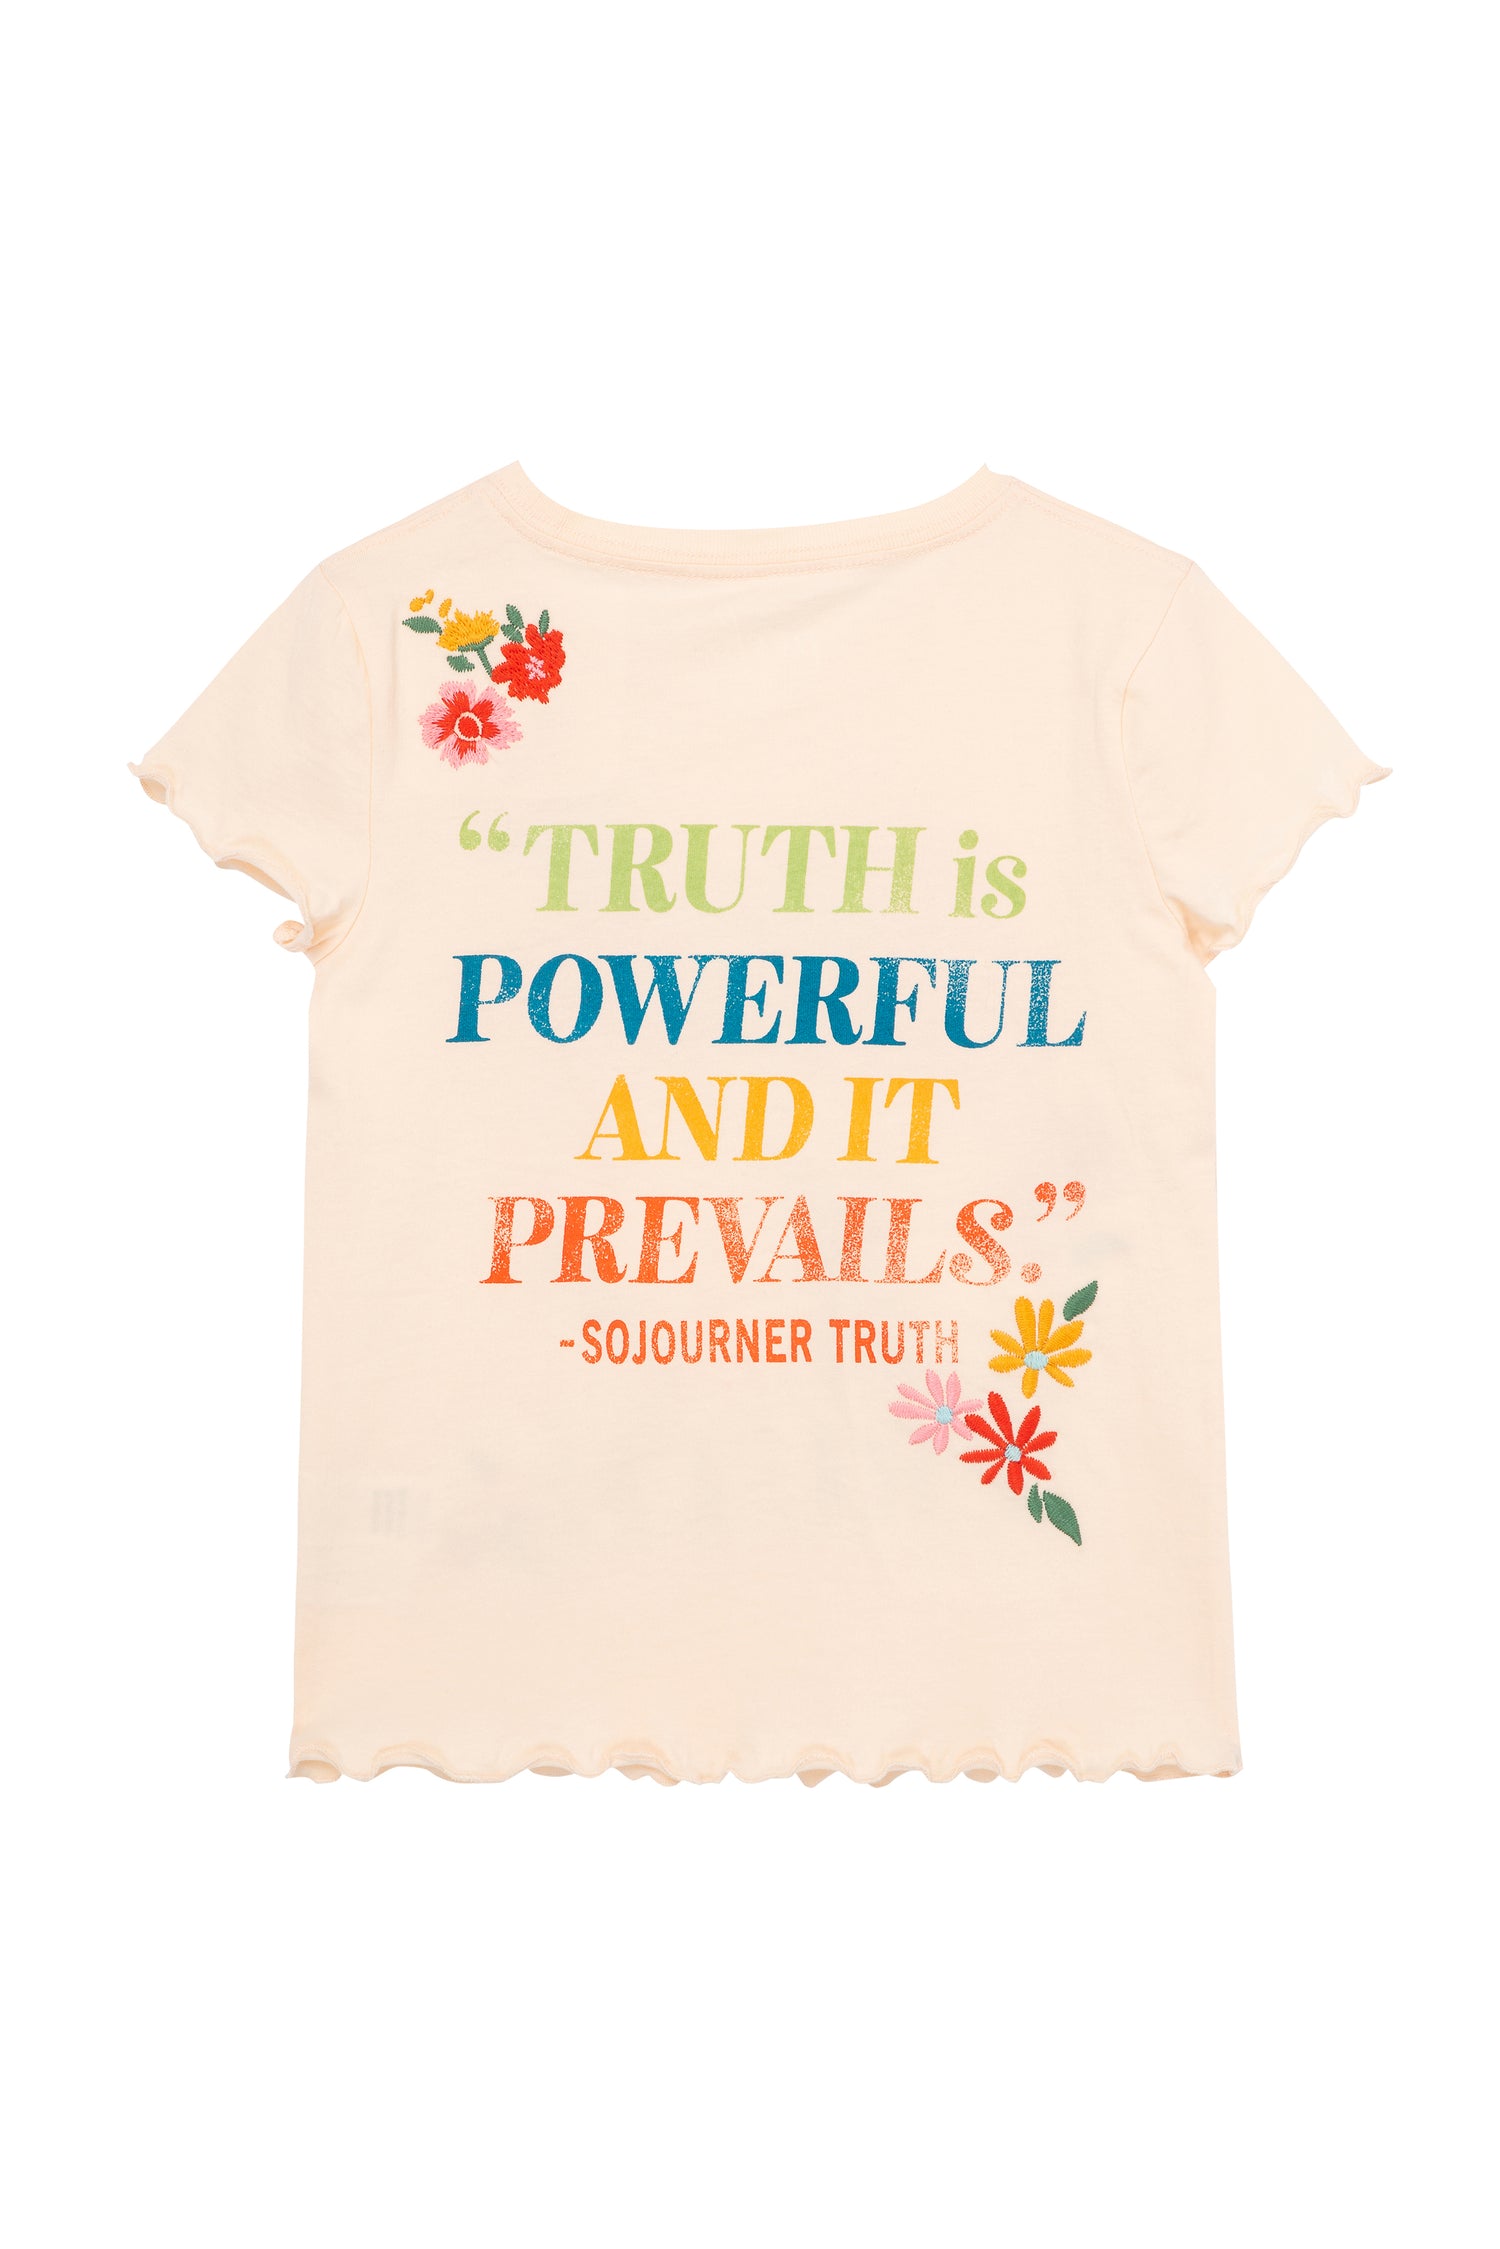 Back of light pink cut-off t-shirt with flowers and quote 'truth is powerful and it prevails'